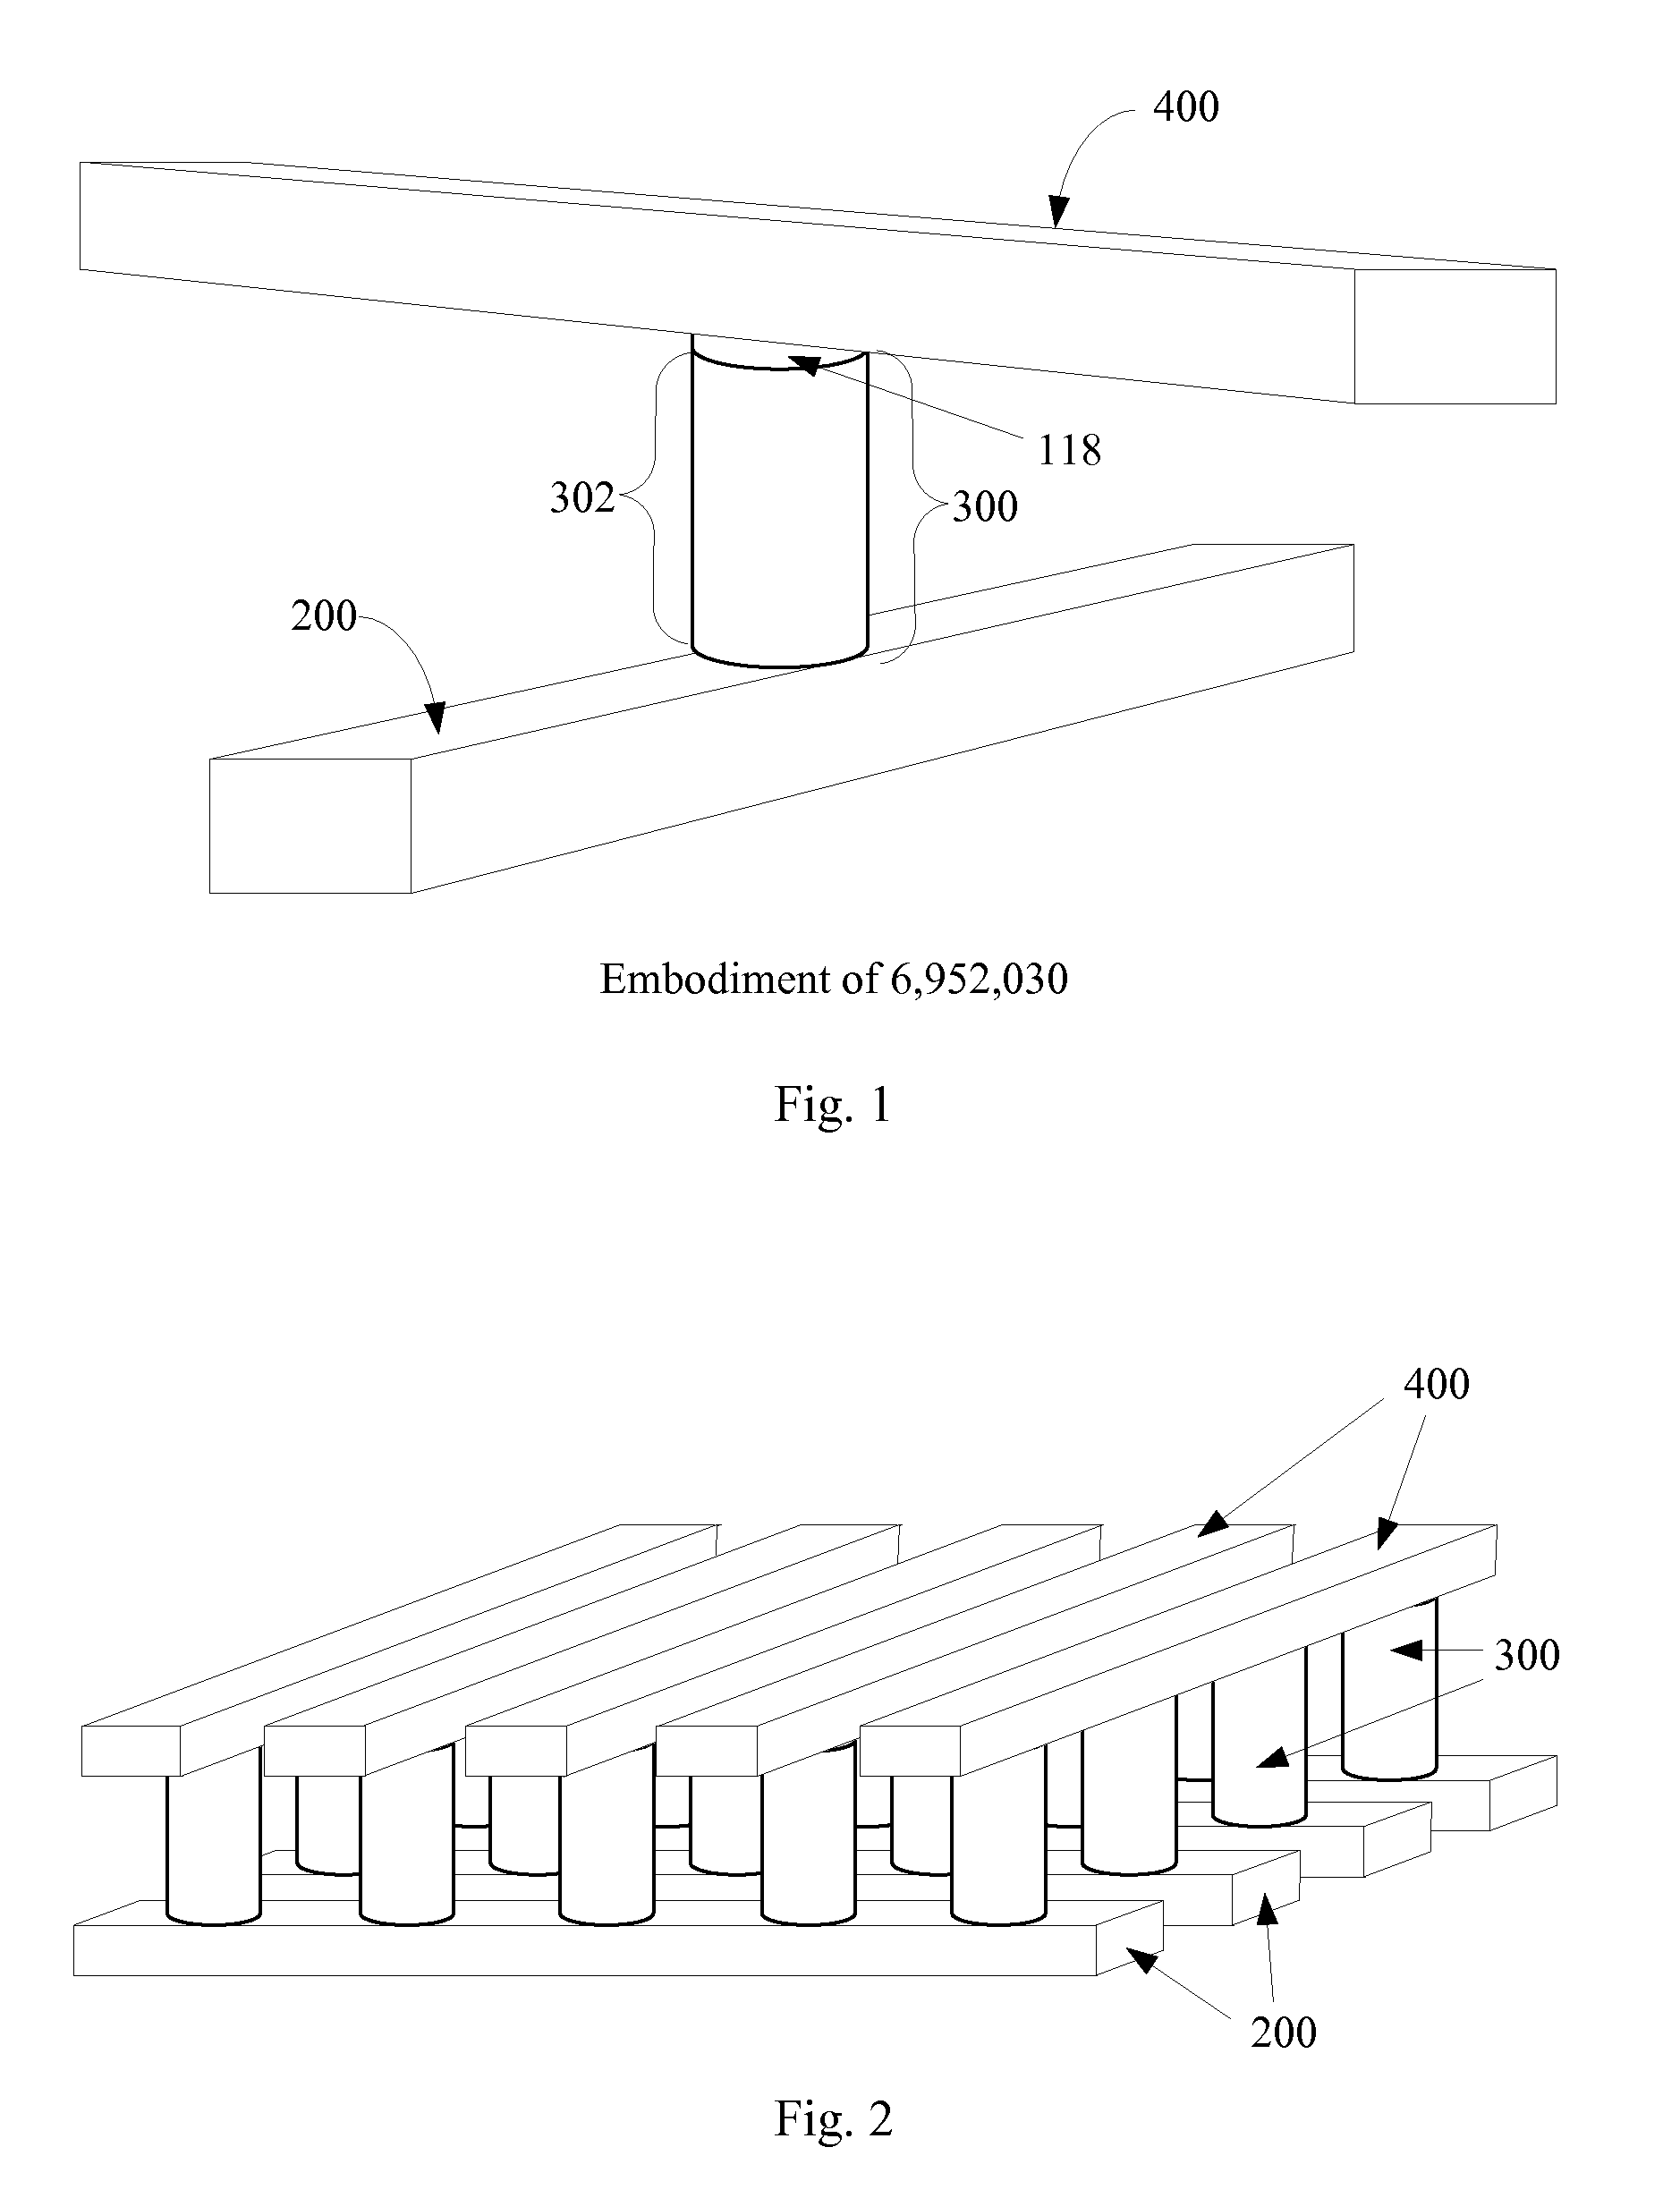 Method to form upward pointing p-i-n diodes having large and uniform current